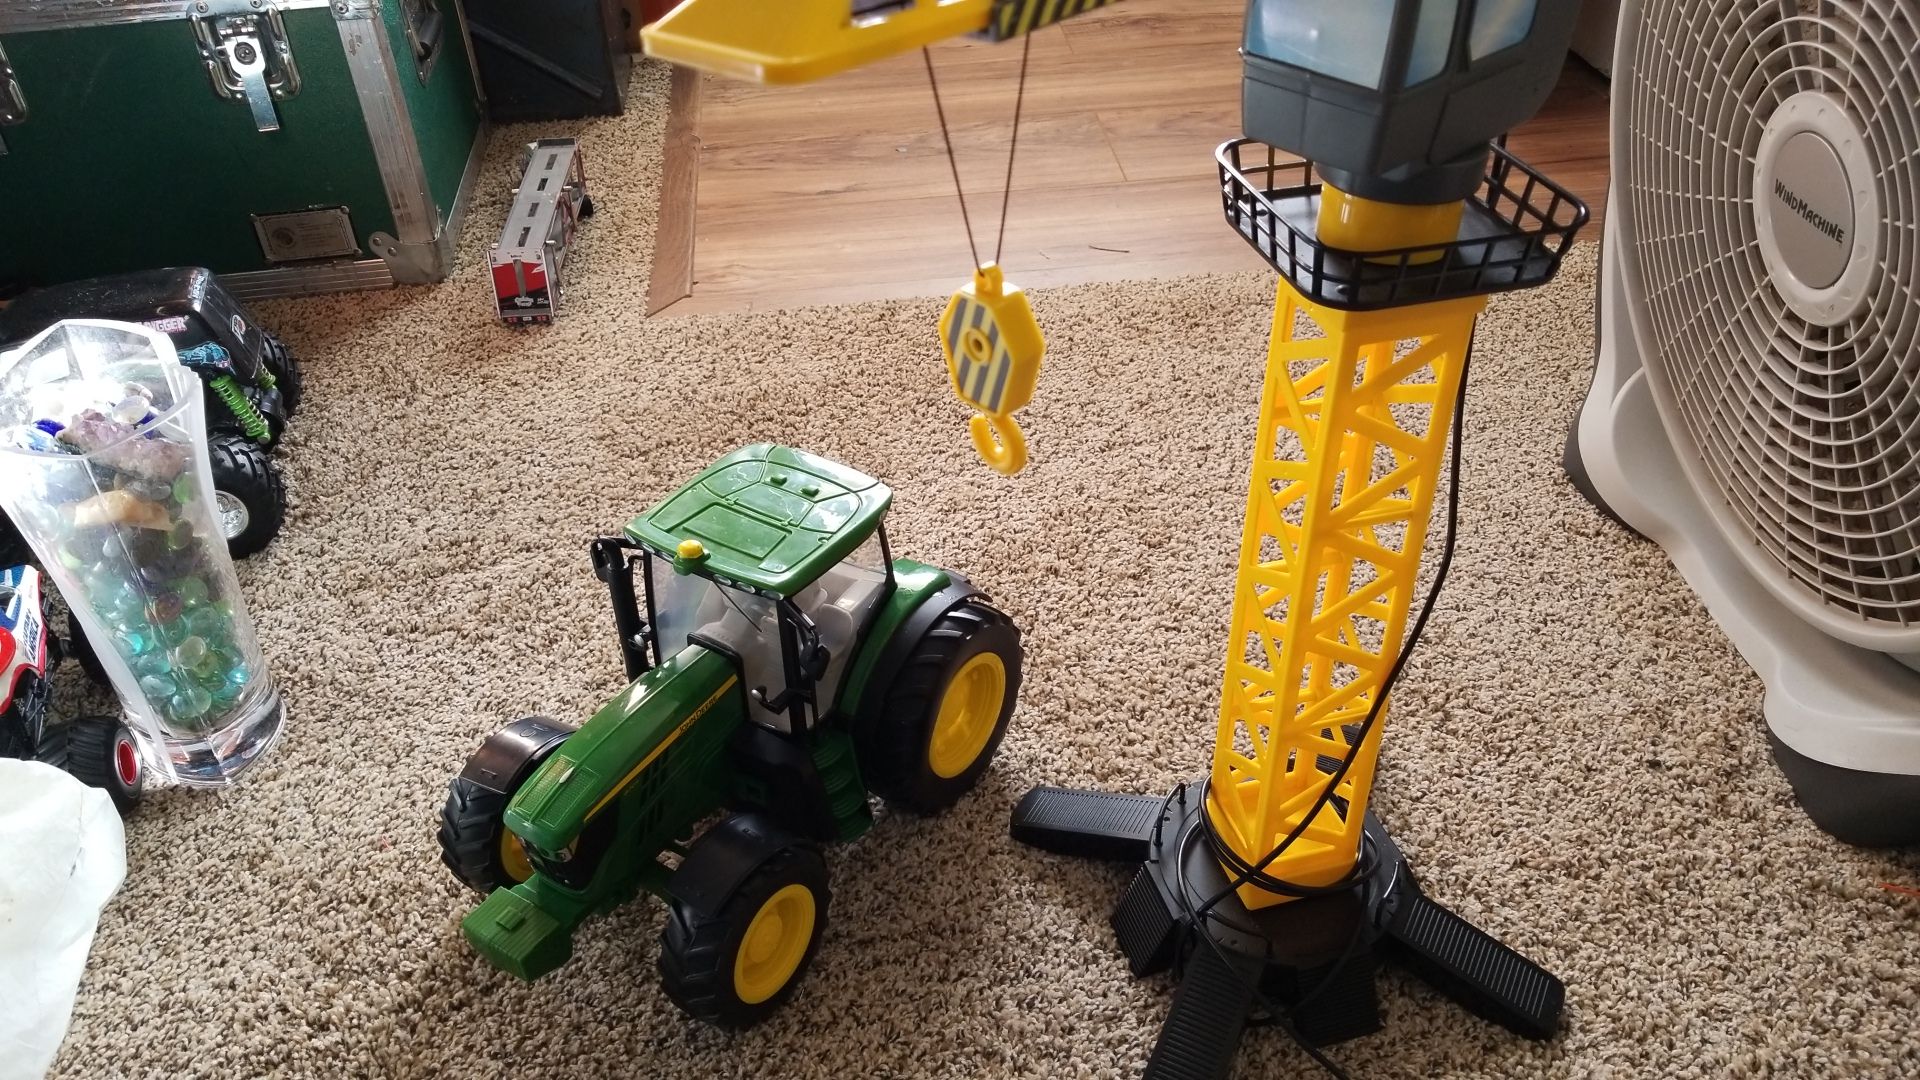 Crane and tractor. Both work